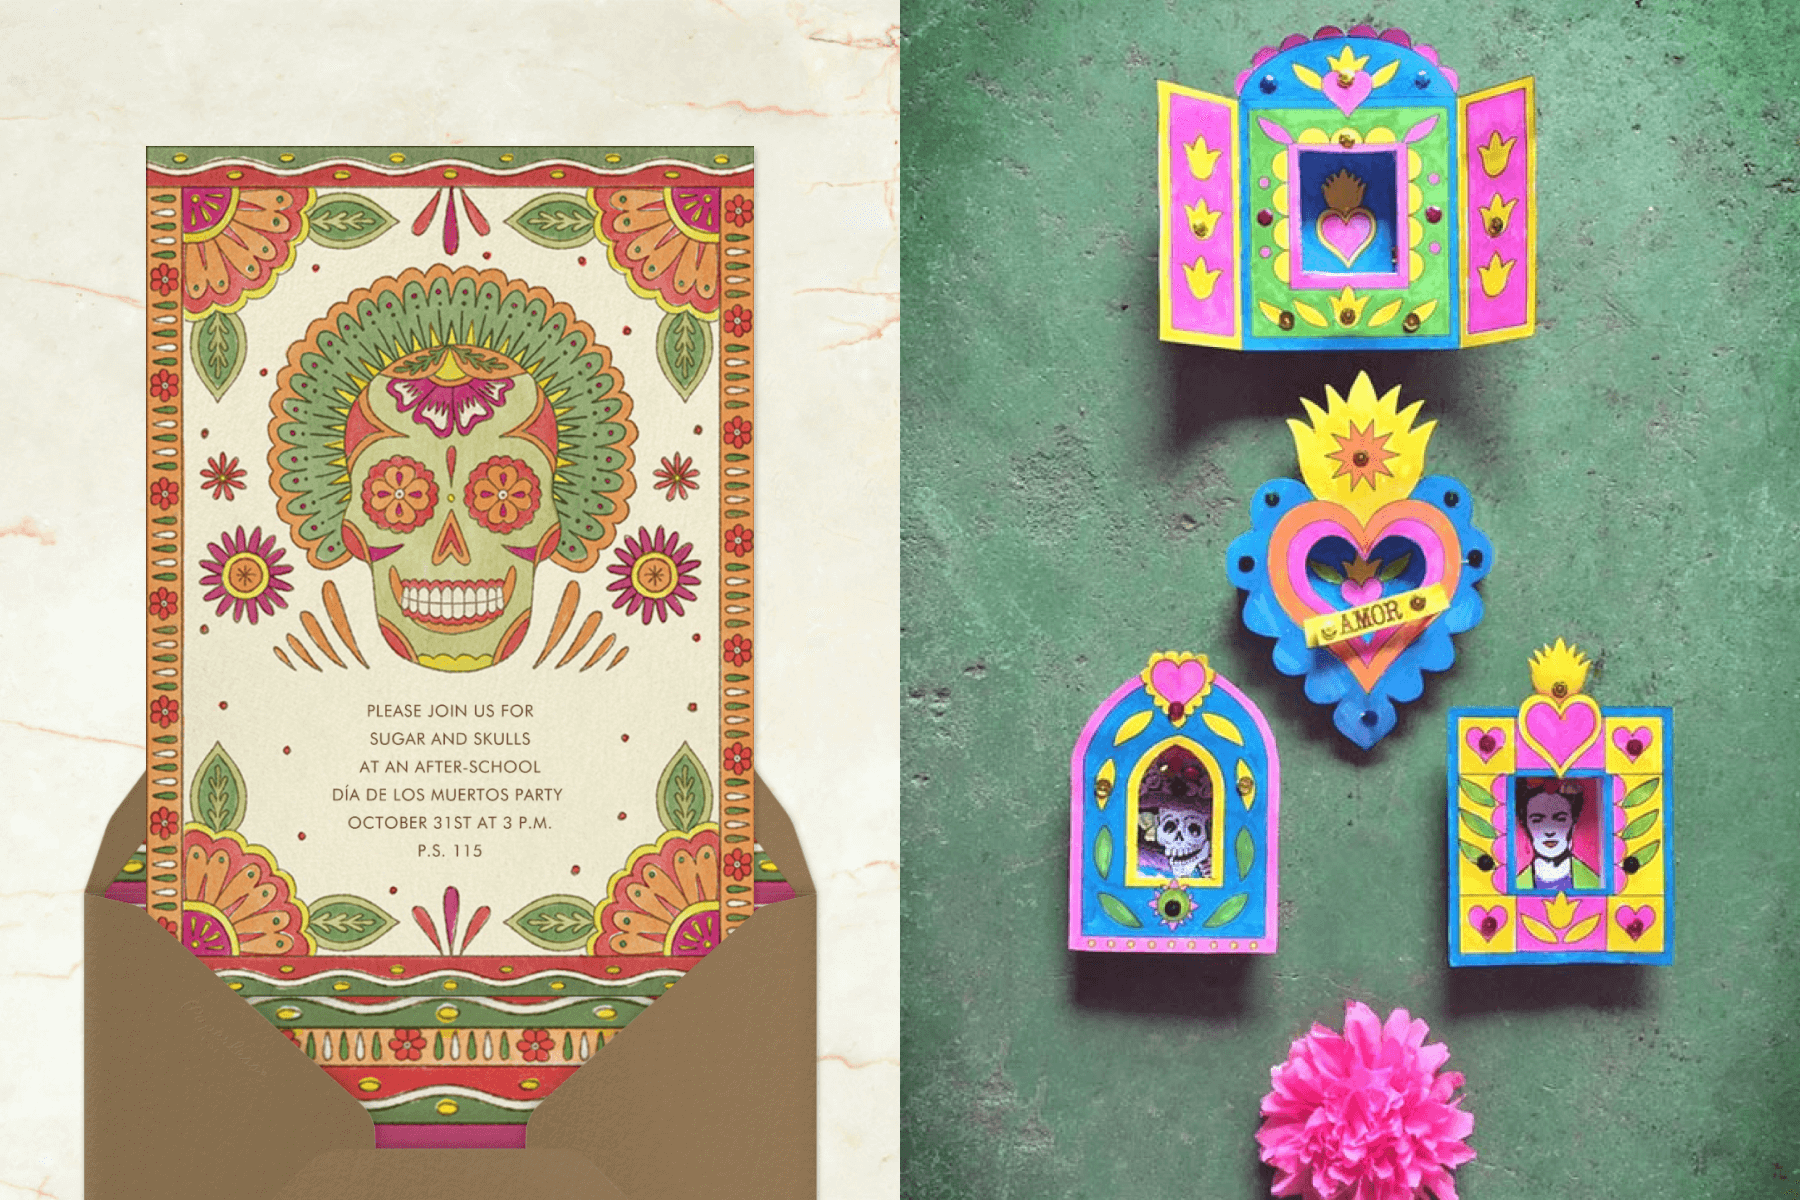 Left: A Dia de Muertos invitation illustrated with a sugar skull and a floral border; Right: Five colorful nichos neatly laid out on a table.